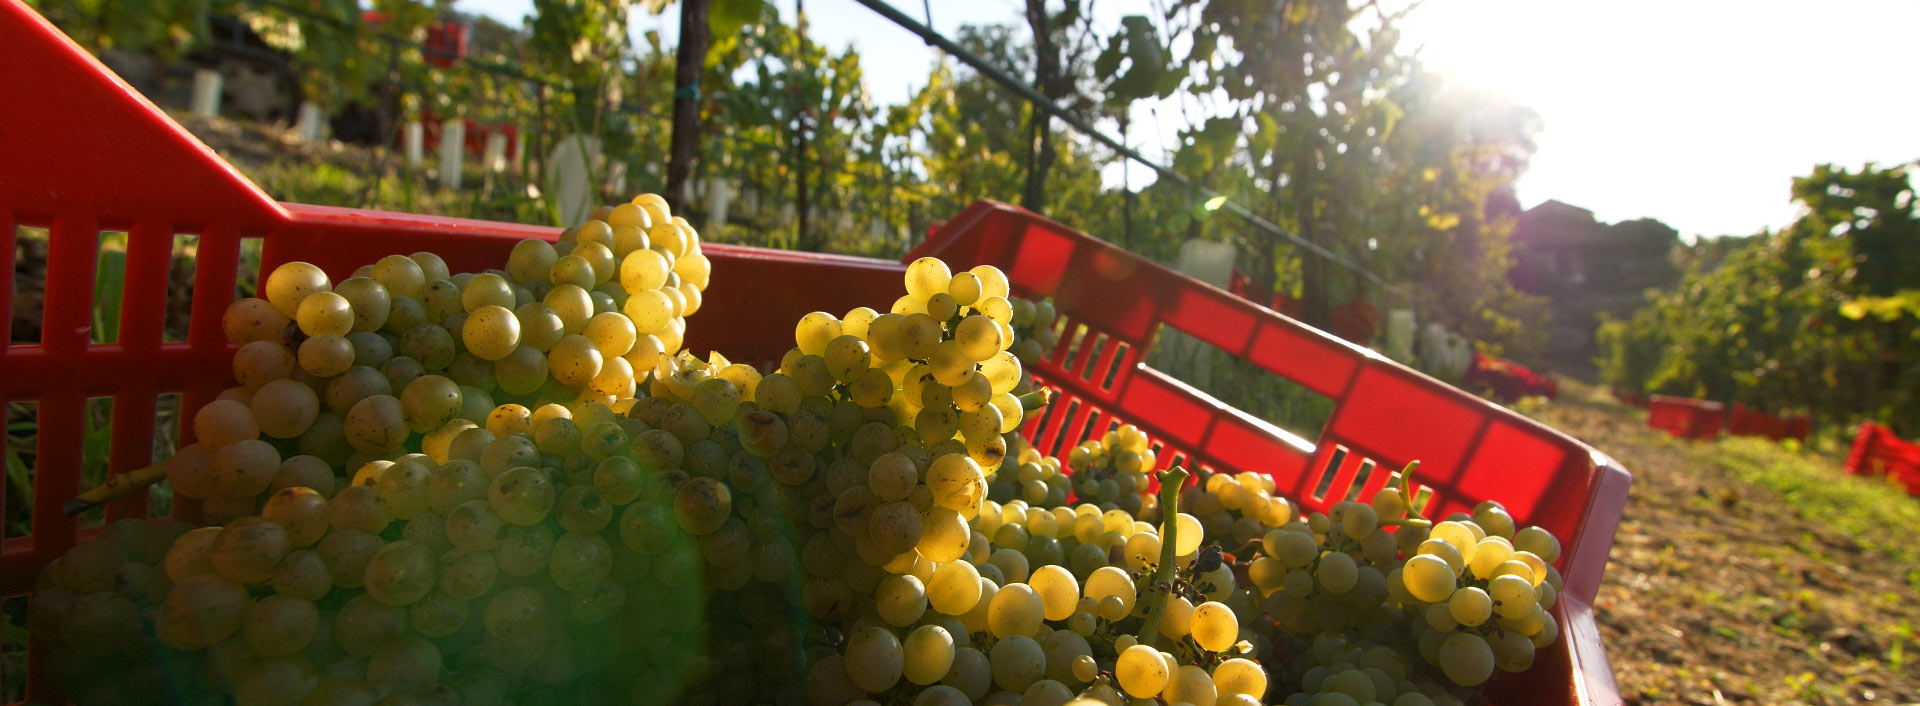 Basket of grapes from the vines of the Castello di Gabiano